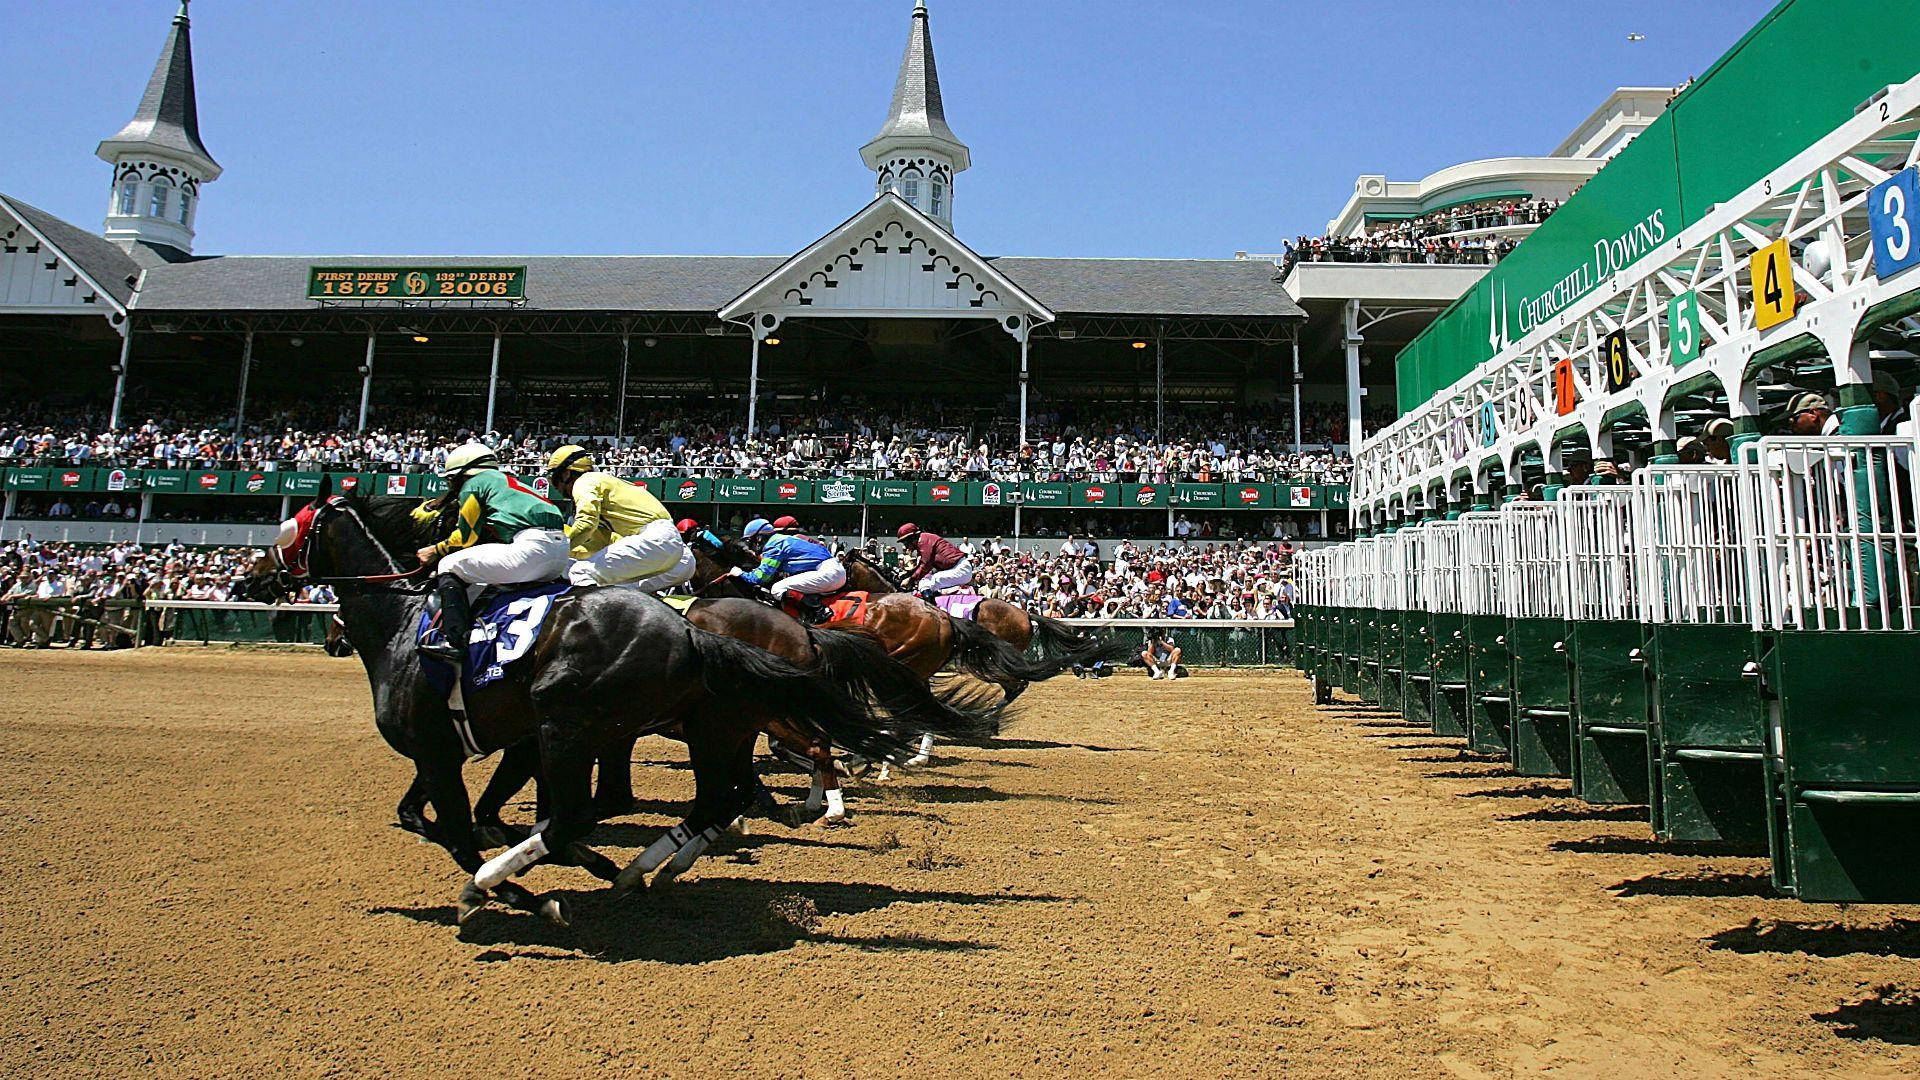 Exciting Moments Captured At The Kentucky Derby Horse Race Festival.